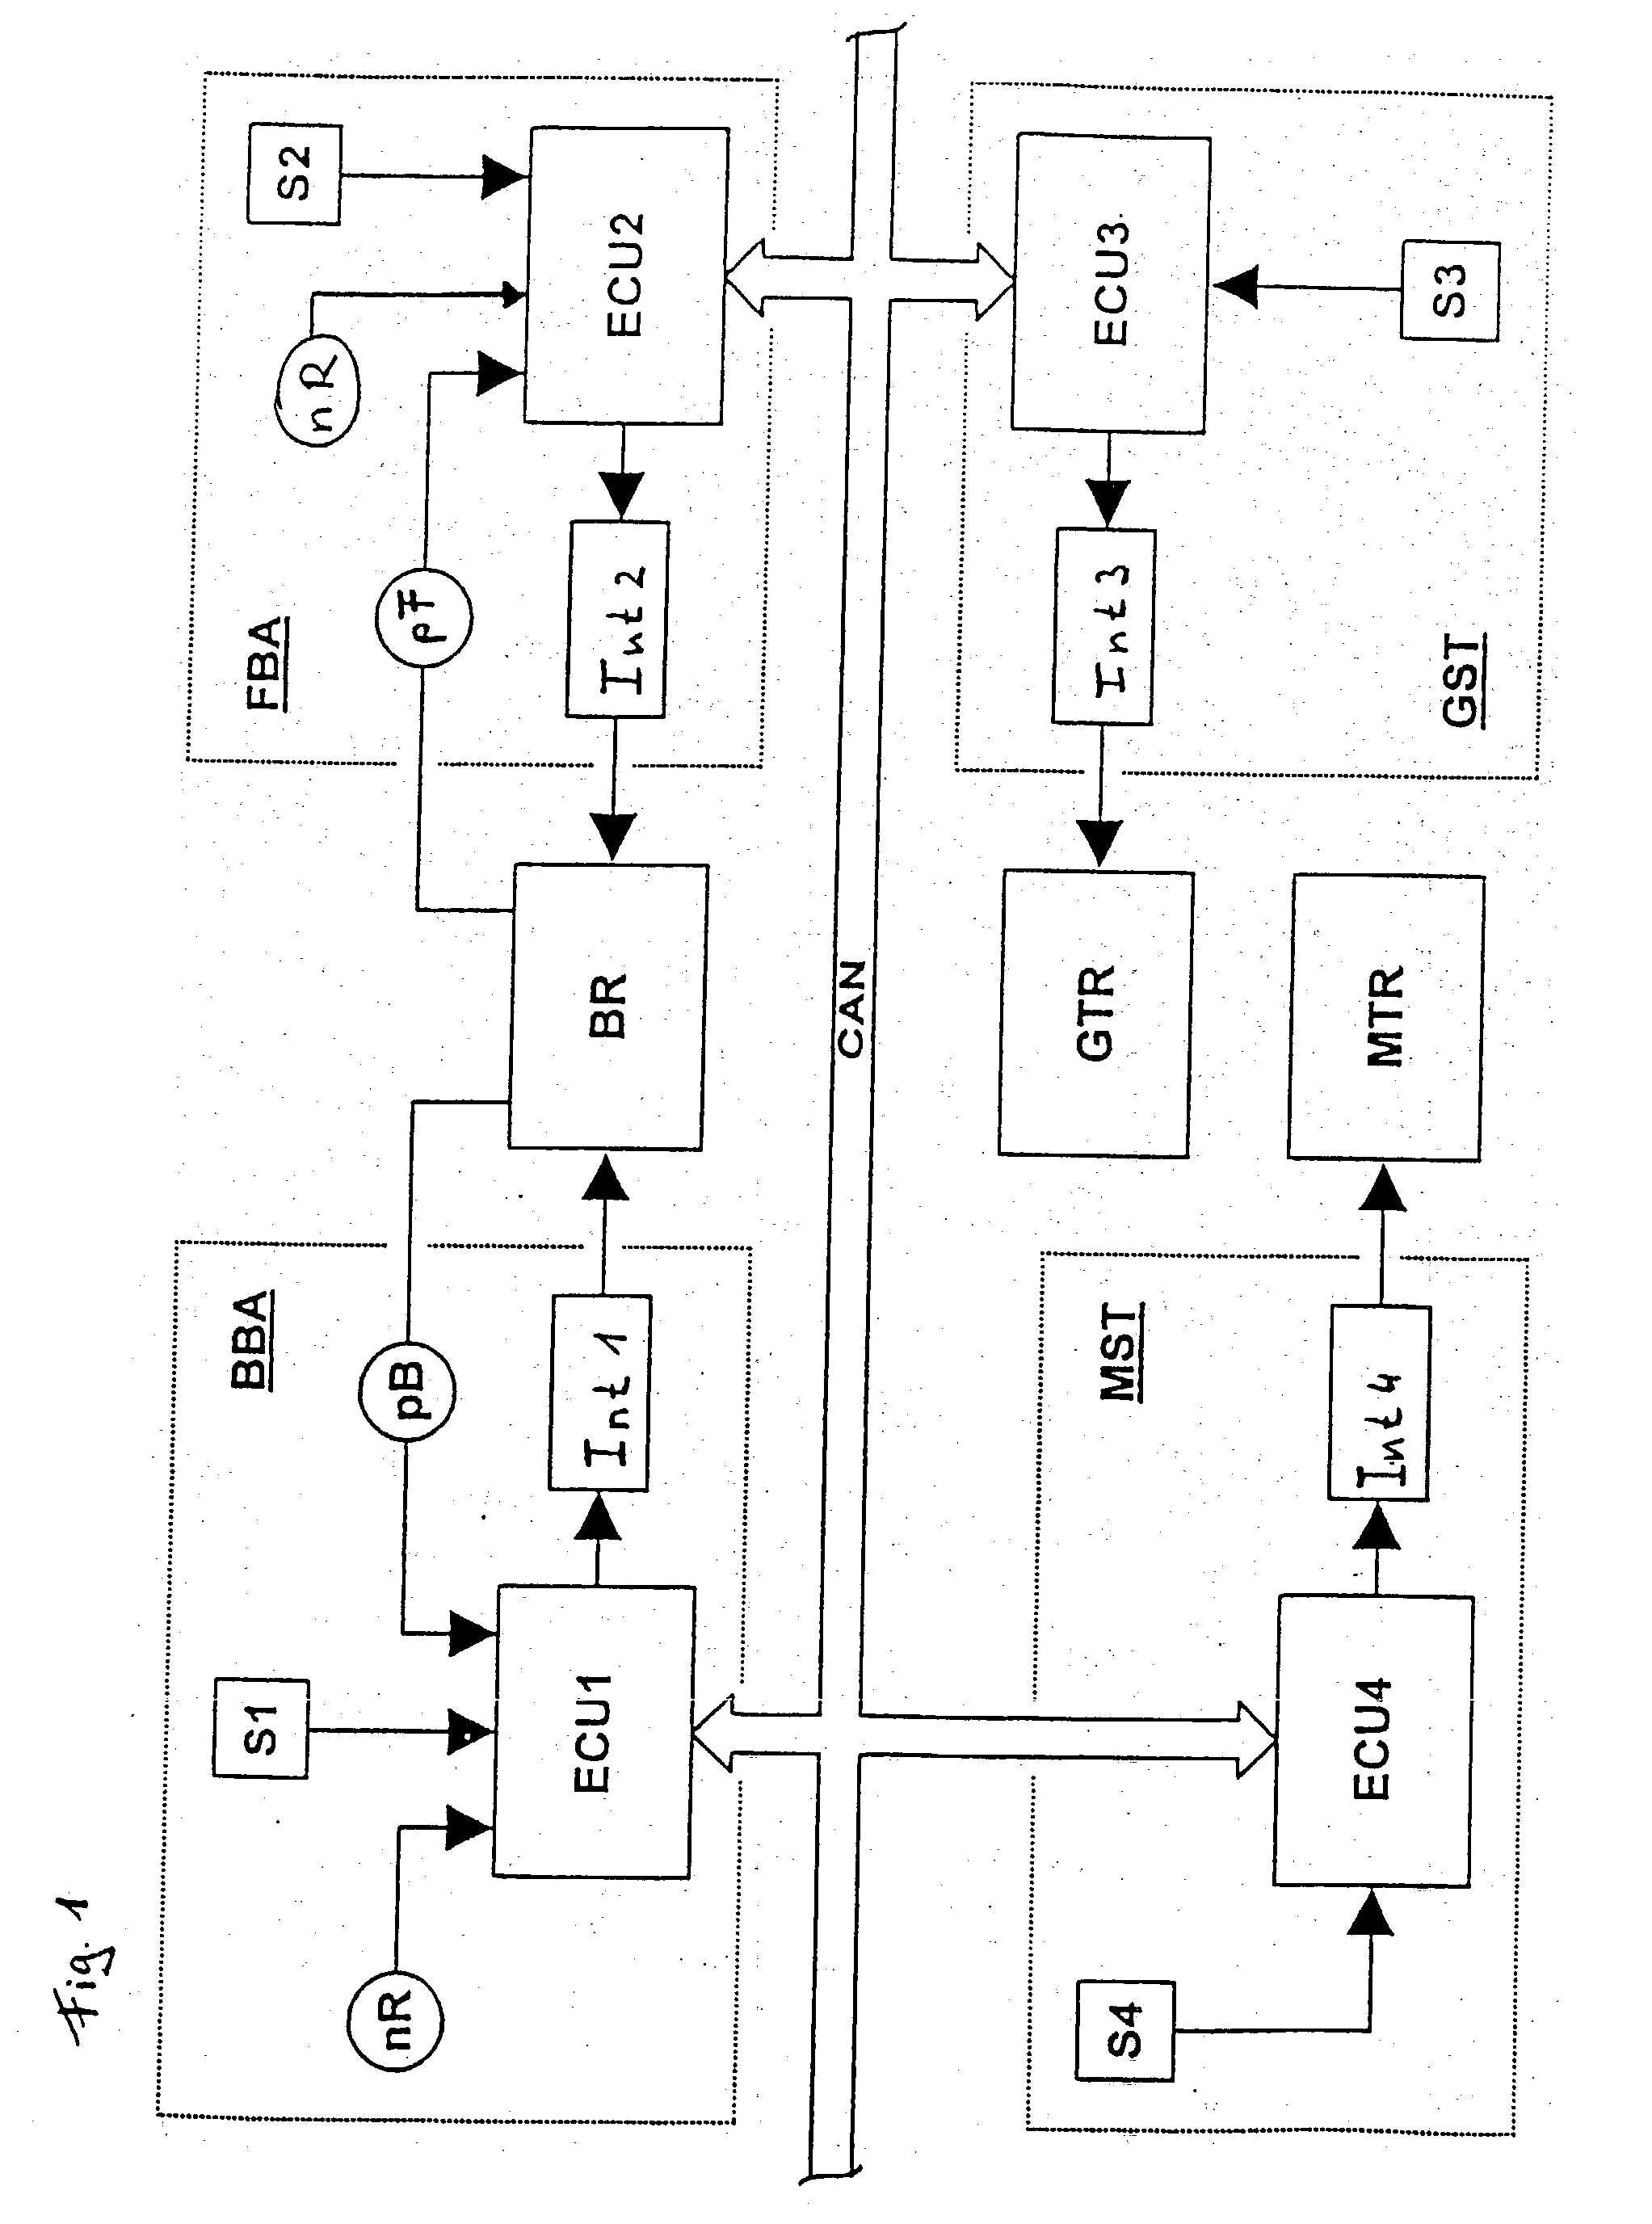 Method and device for controlling the braking equipment of a motor vehicle